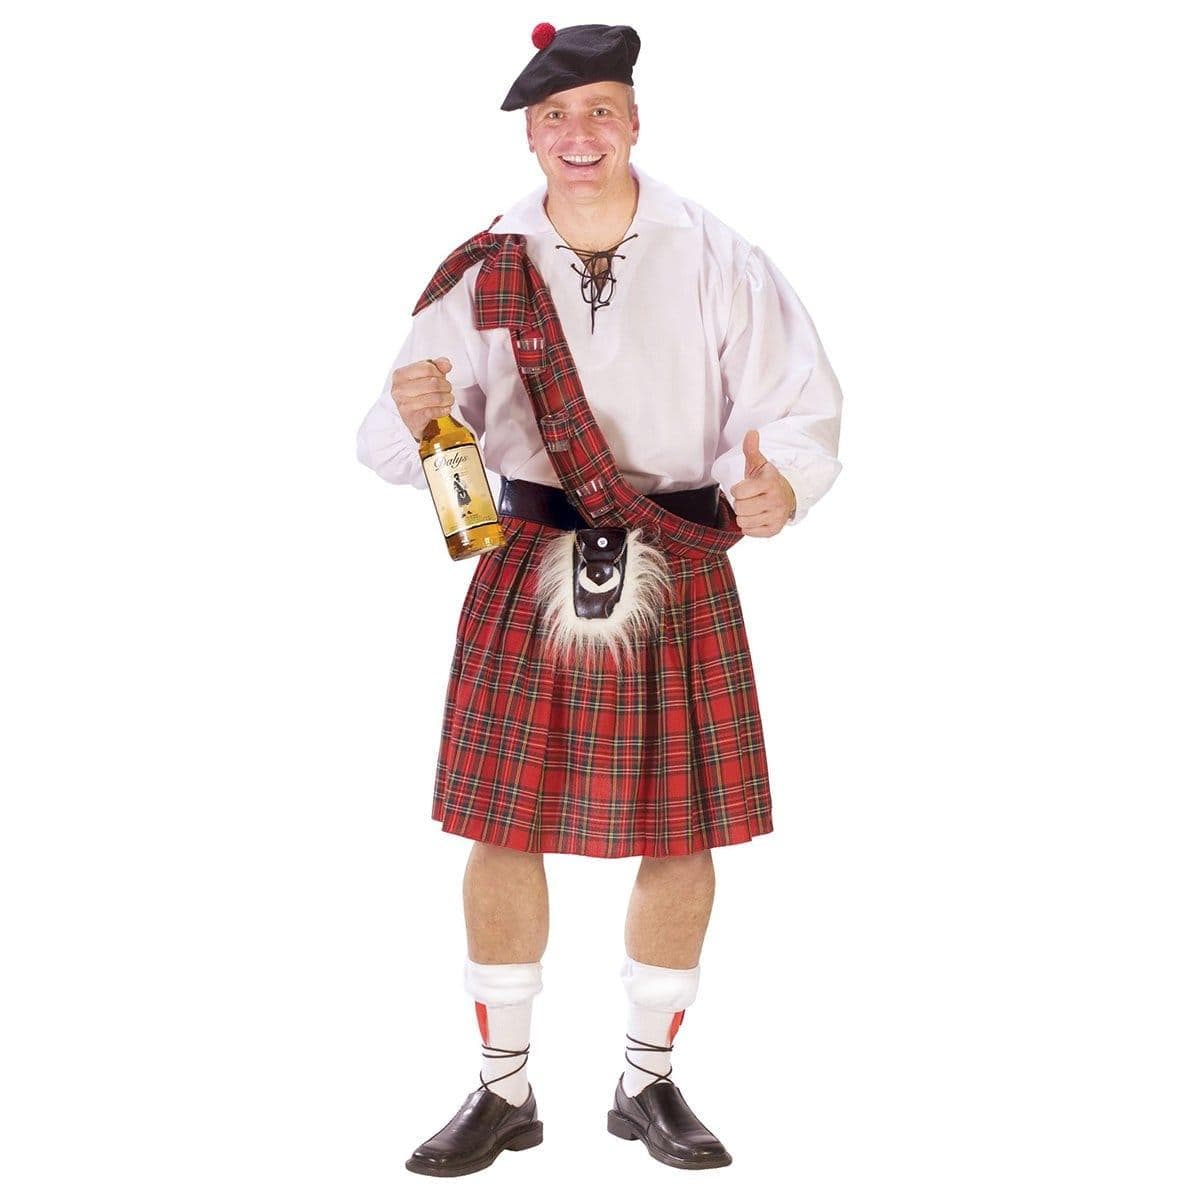 Buy Costumes Big Shot Scot Costume for Adults sold at Party Expert